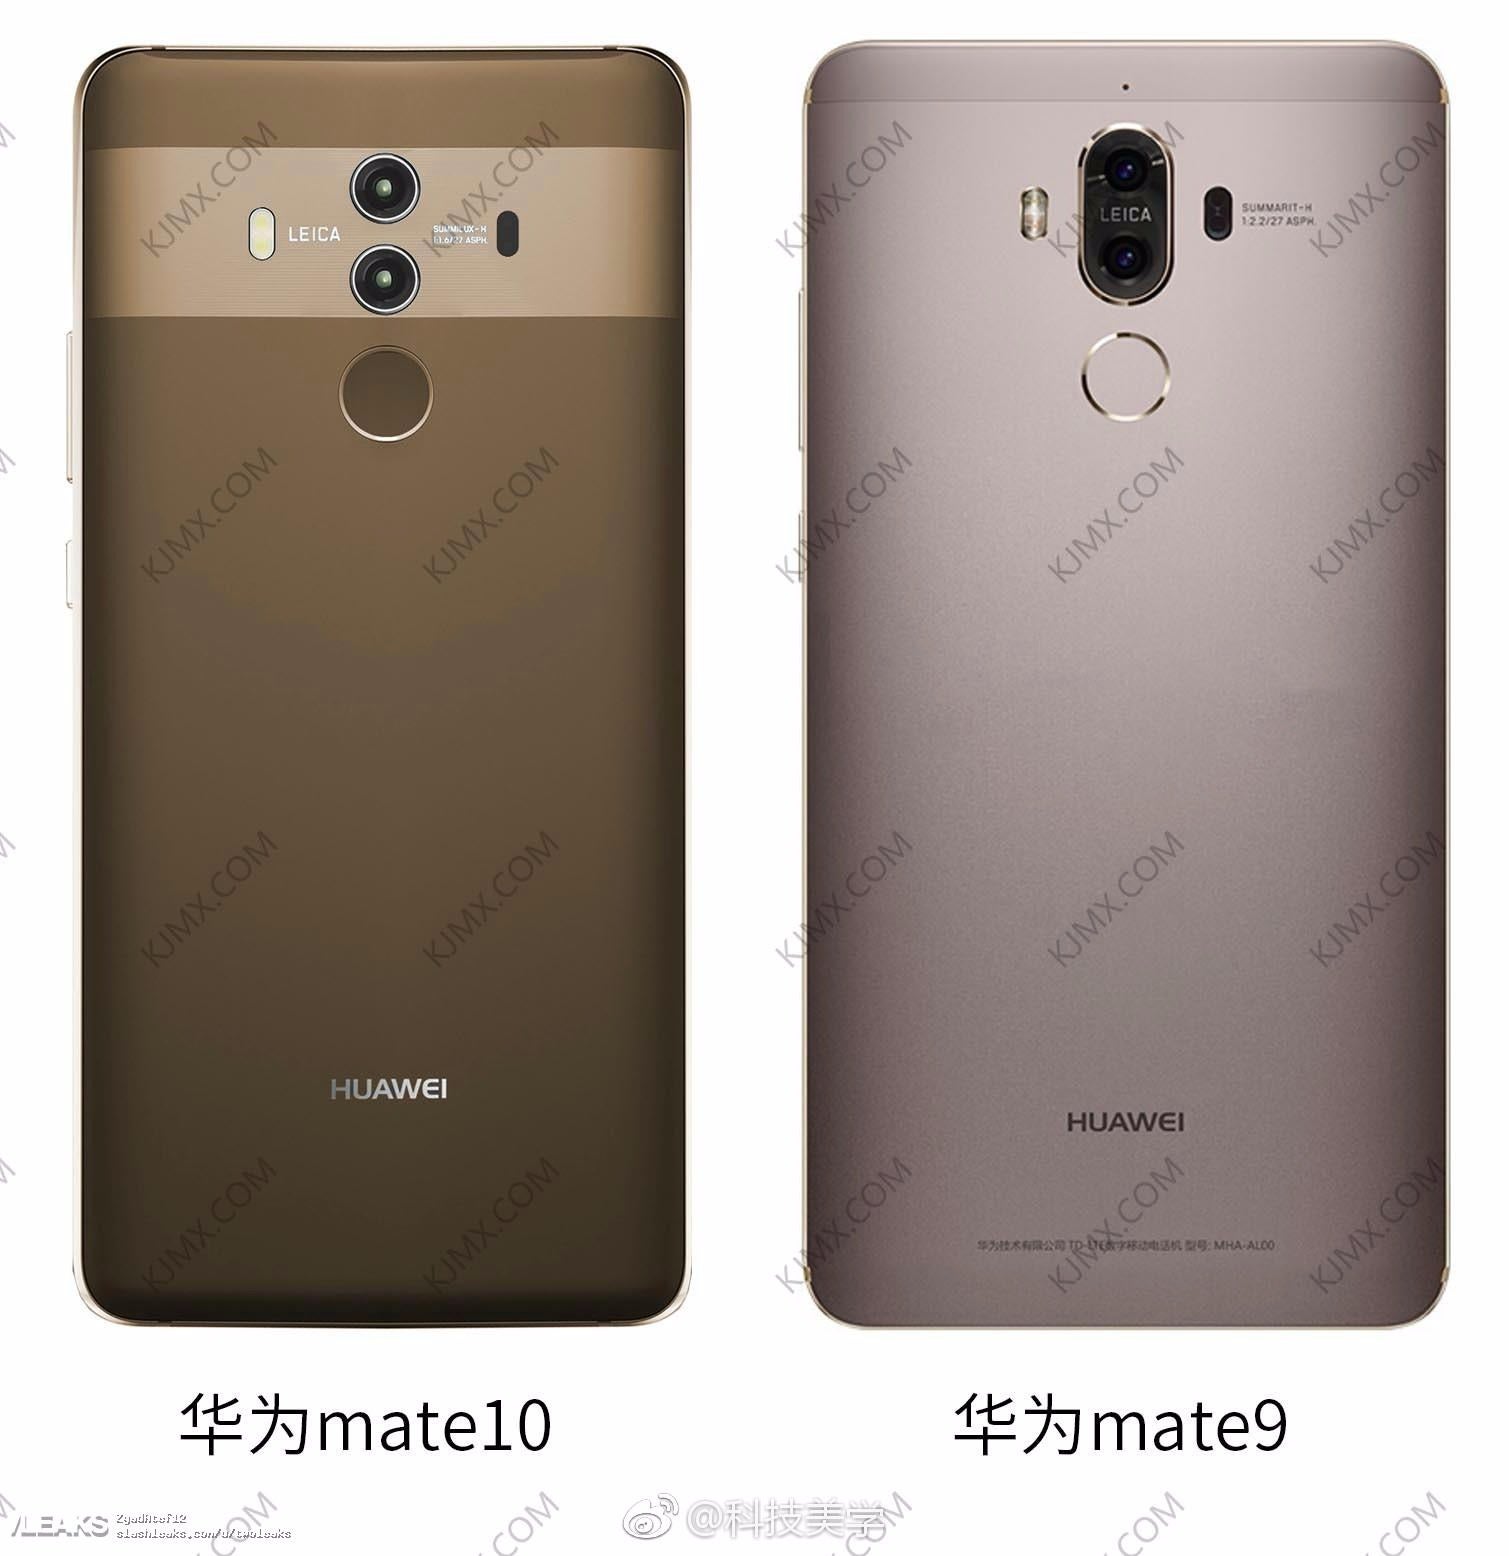 See how the Huawei Mate 10 Pro compares to last year's Mate 9